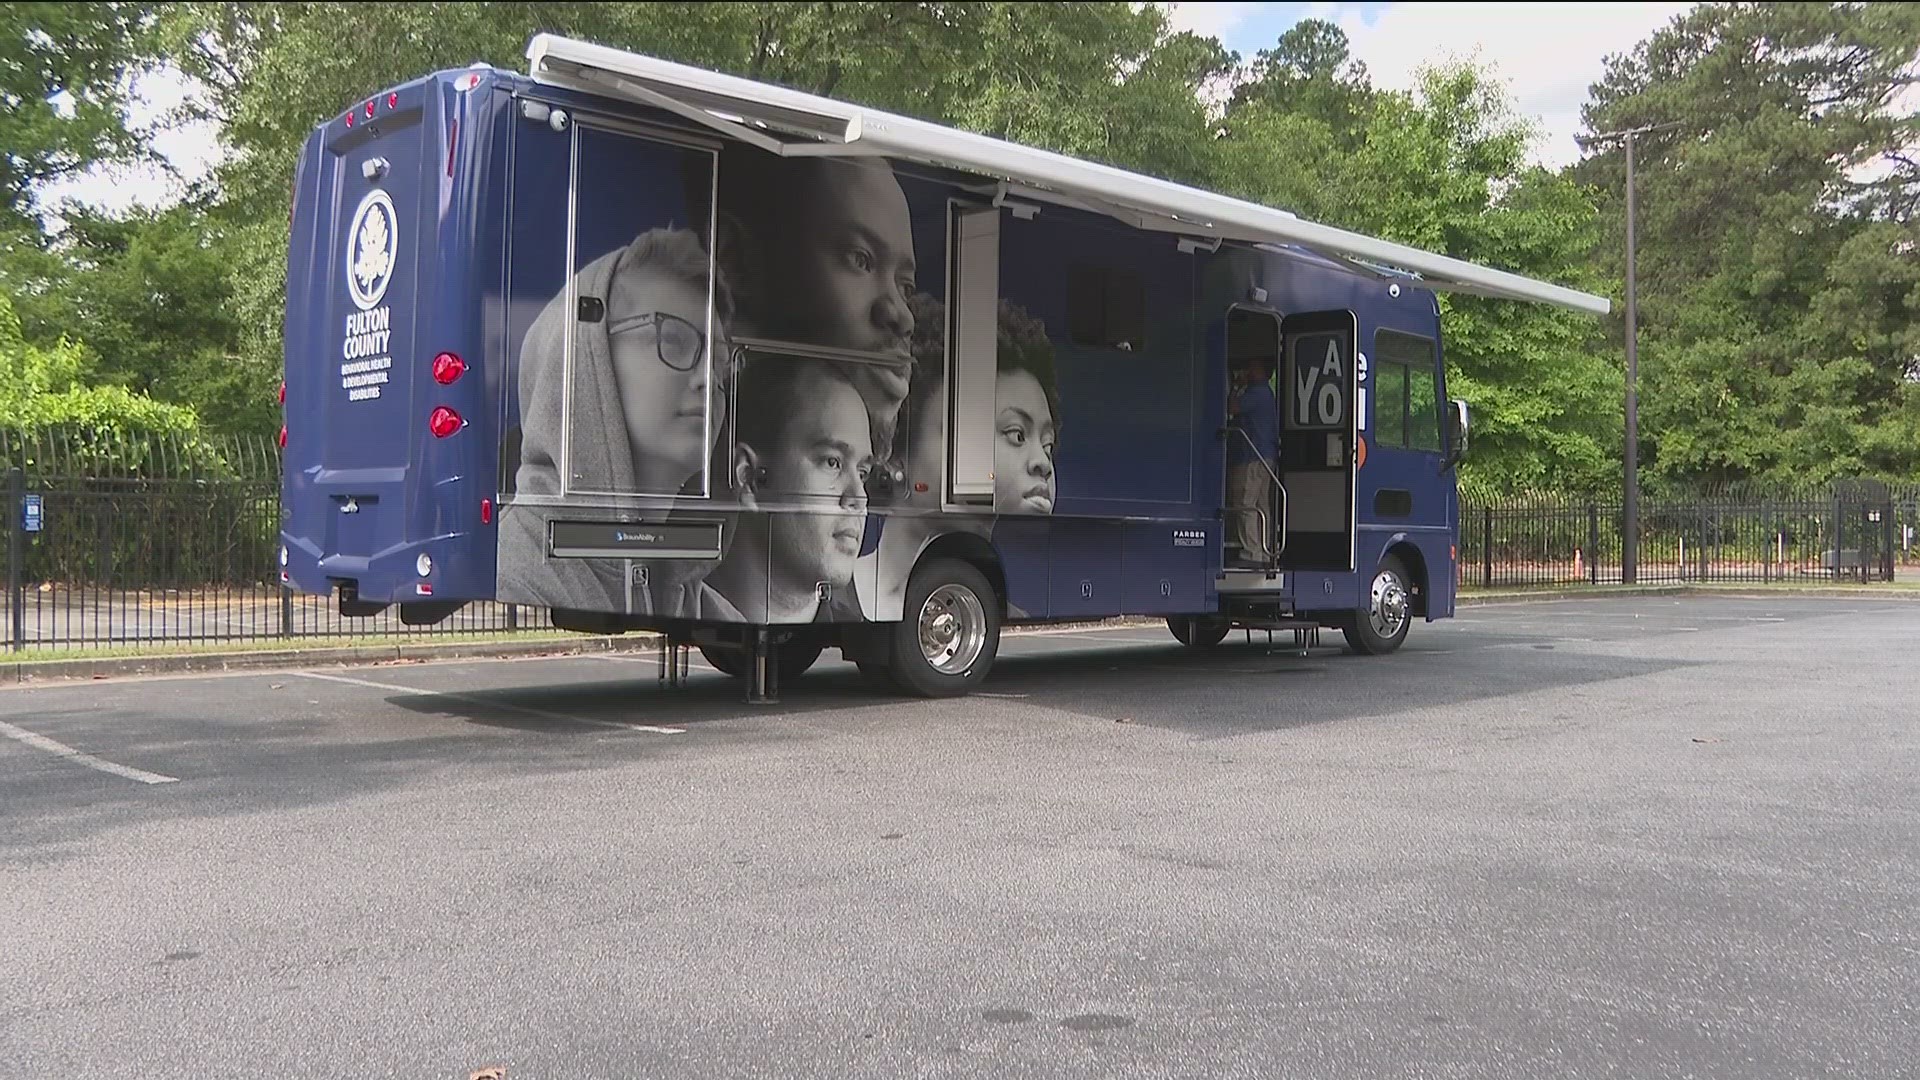 The bus will serve as a resource that will educate residents about mental health treatments.